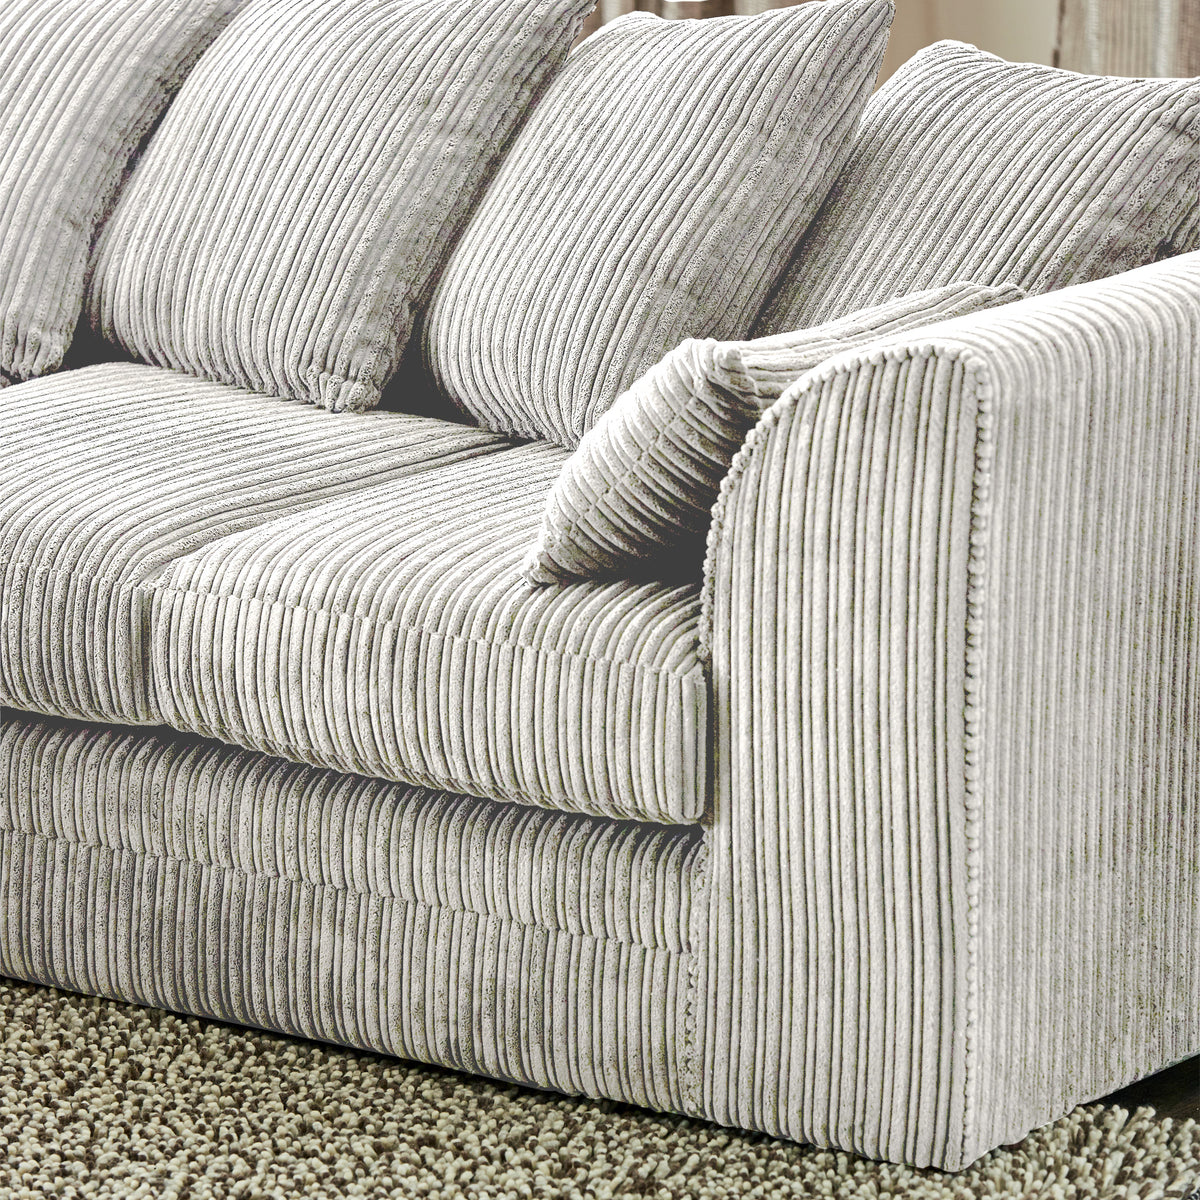 Bletchley Cream Jumbo Cord 2 Seater Sofa from Roseland Furniture